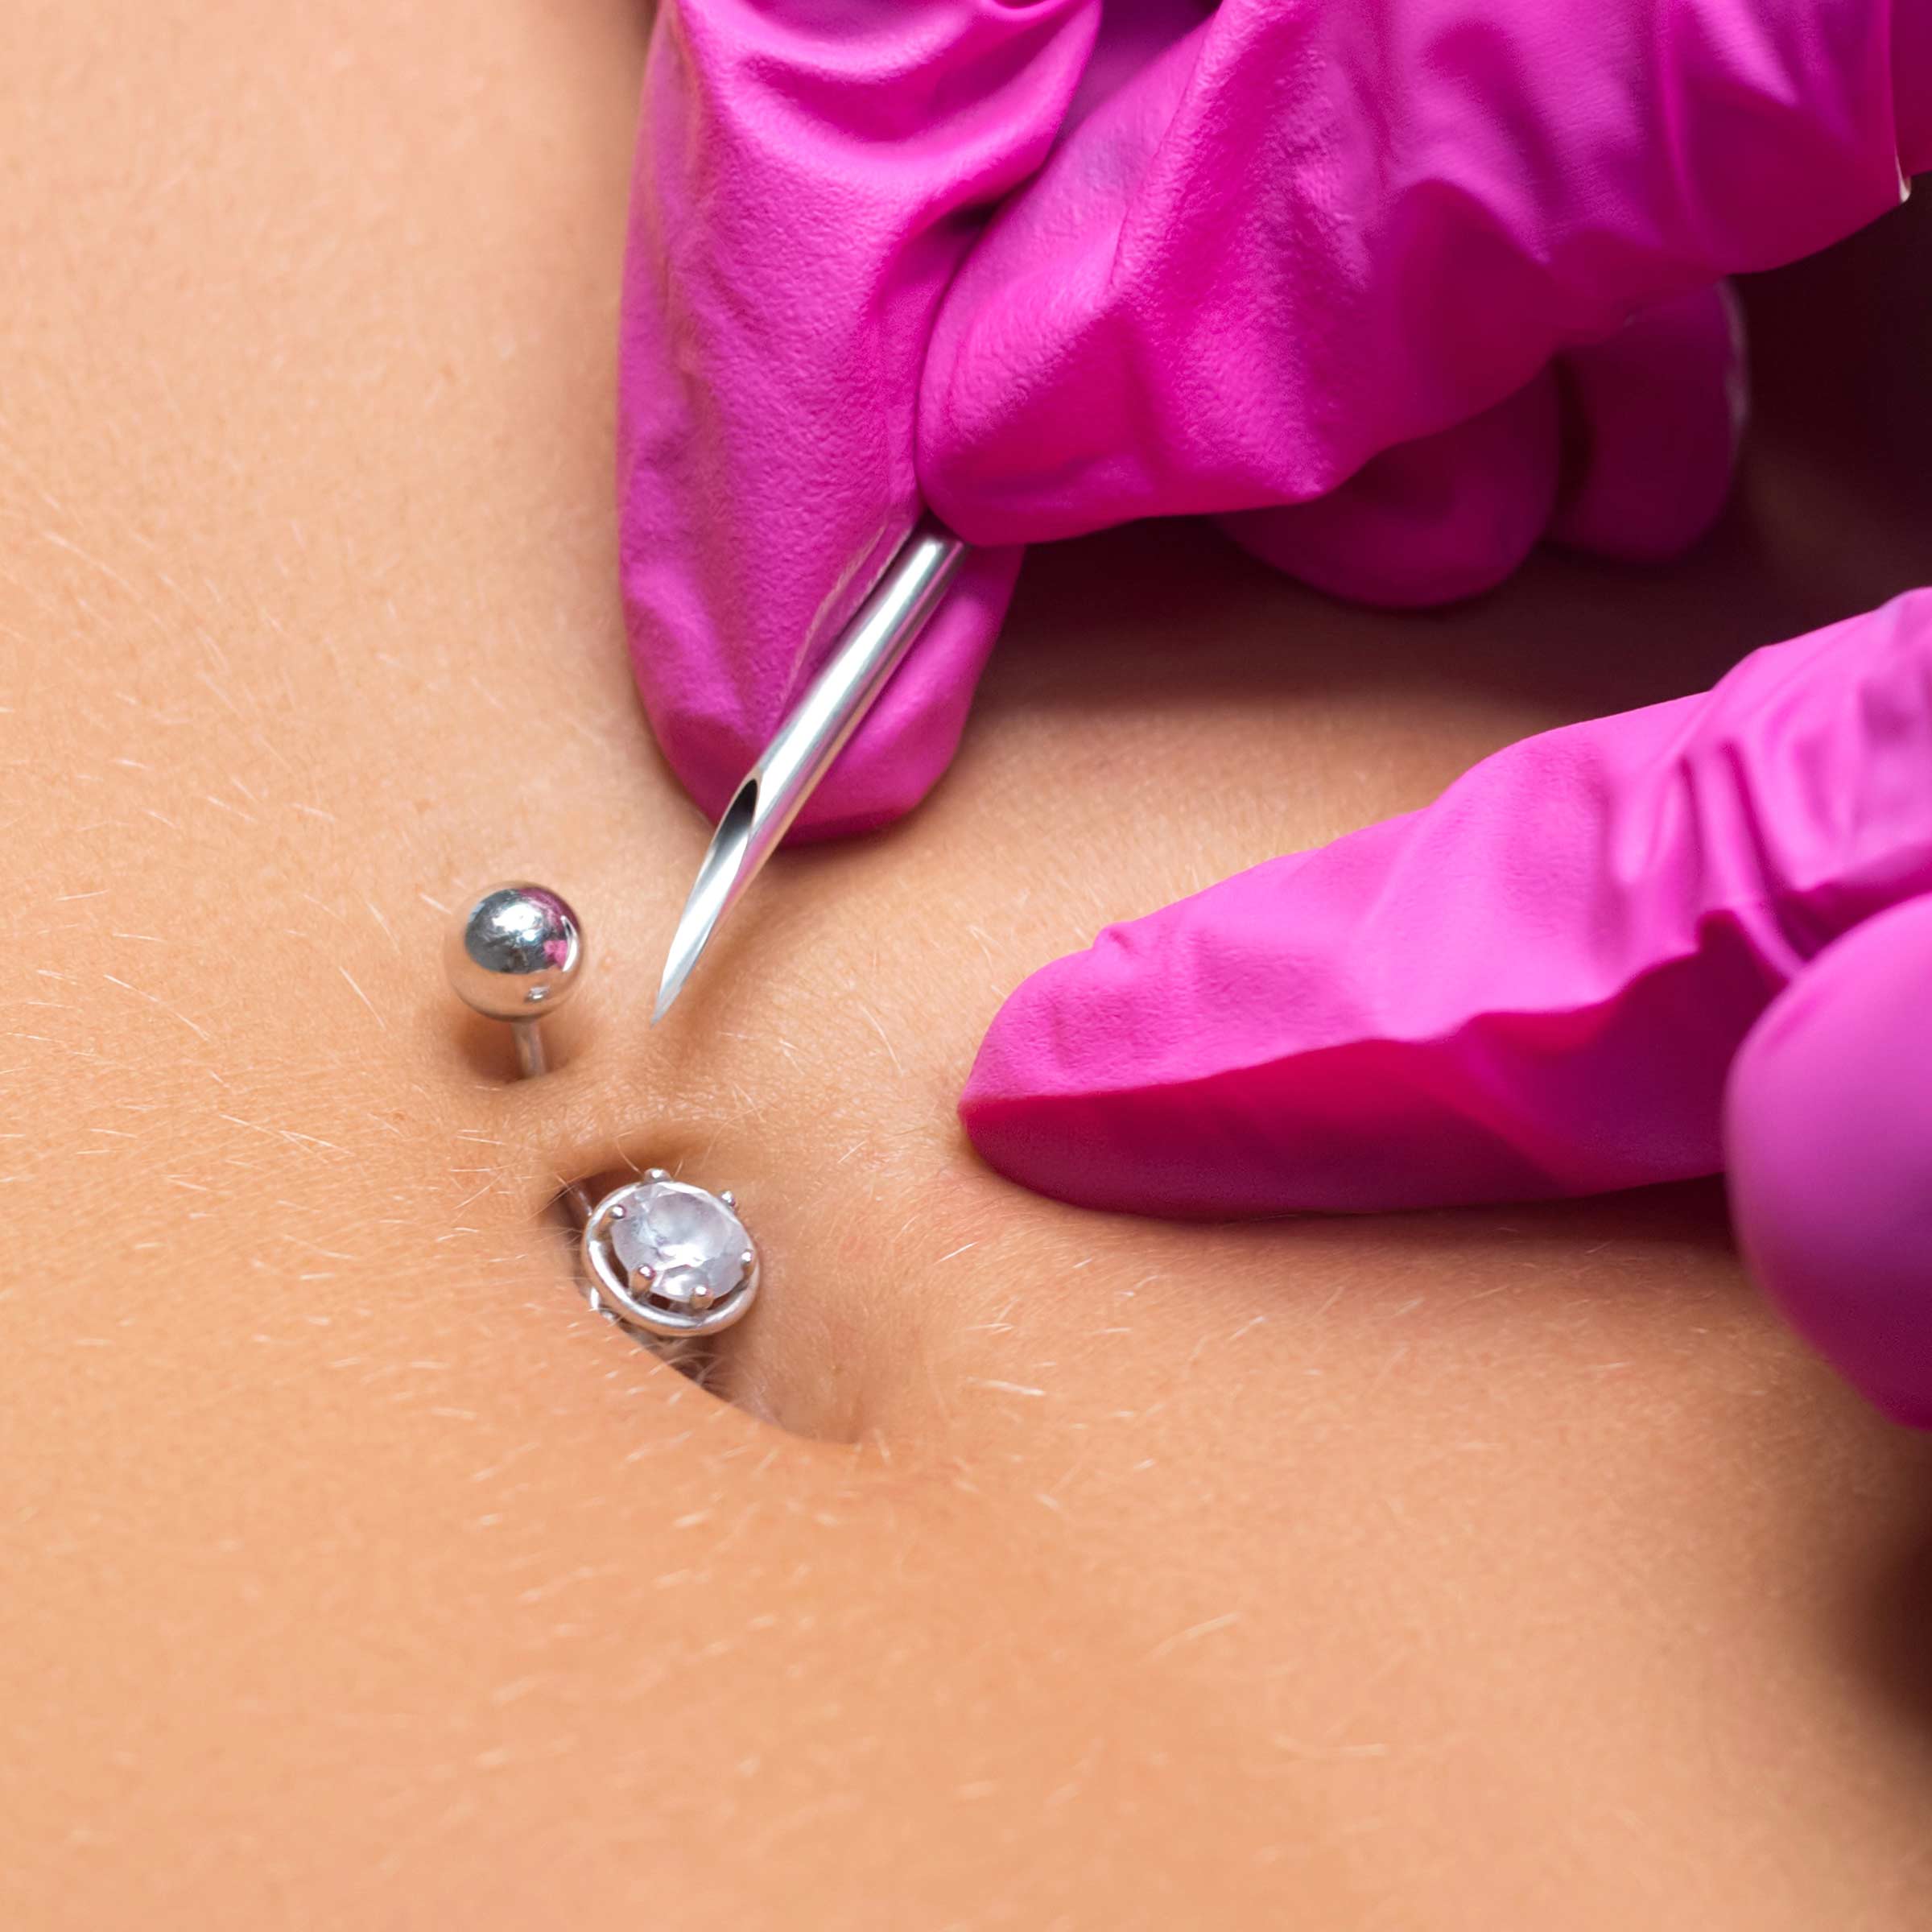 New Piercing 101: Dermatologists Share Their Top Cleaning and Aftercare Tips